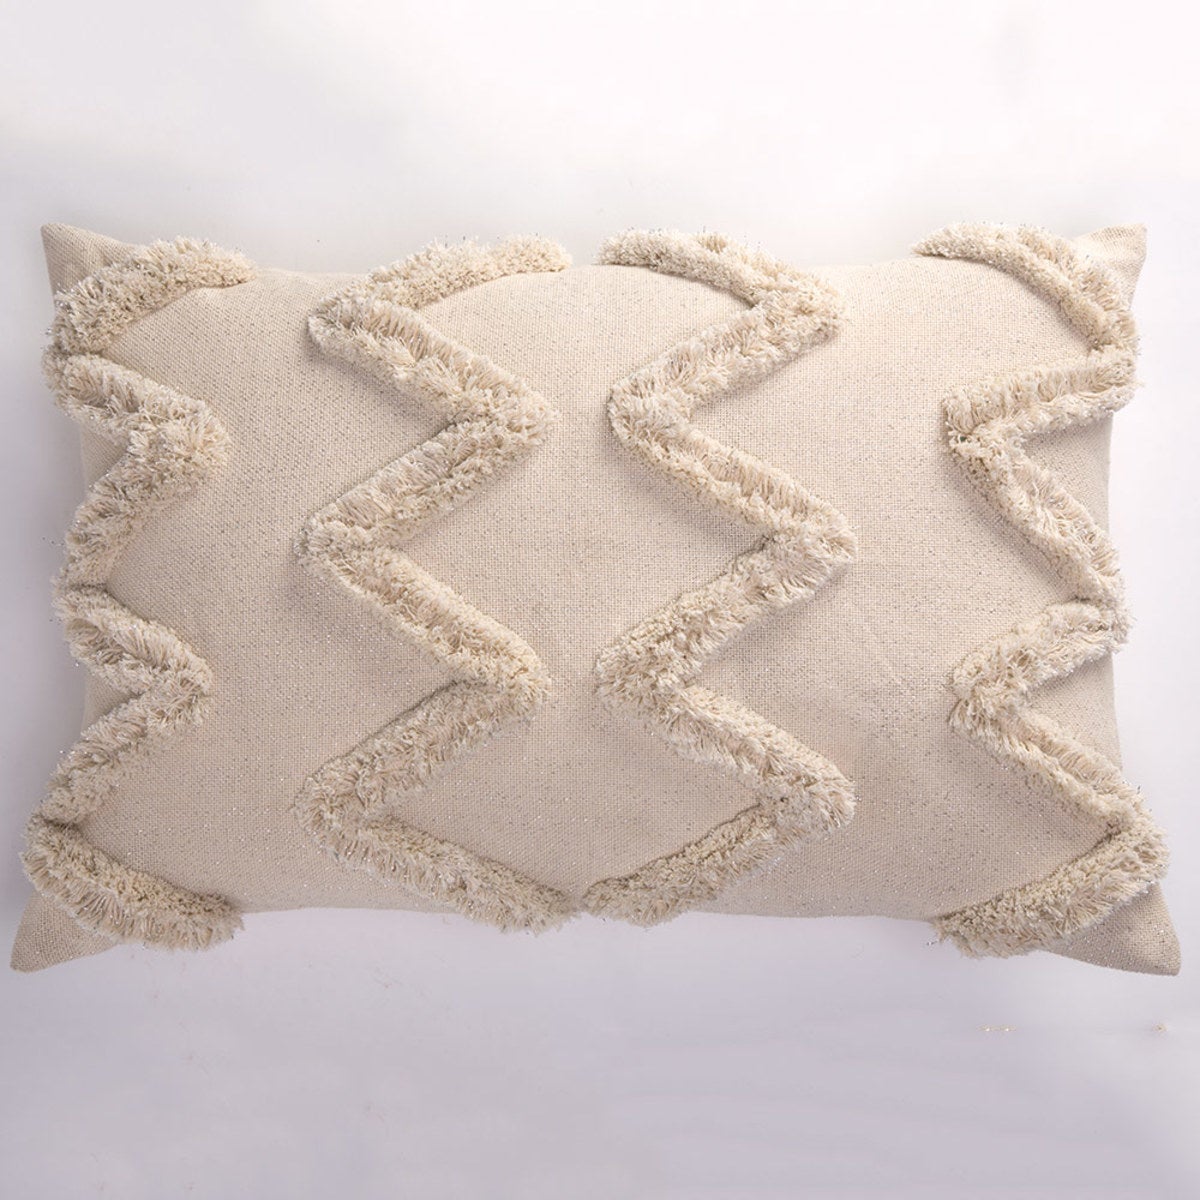 Large Shimmering Rectangle Pillow Cover, 18" sq. - Large Rectangle